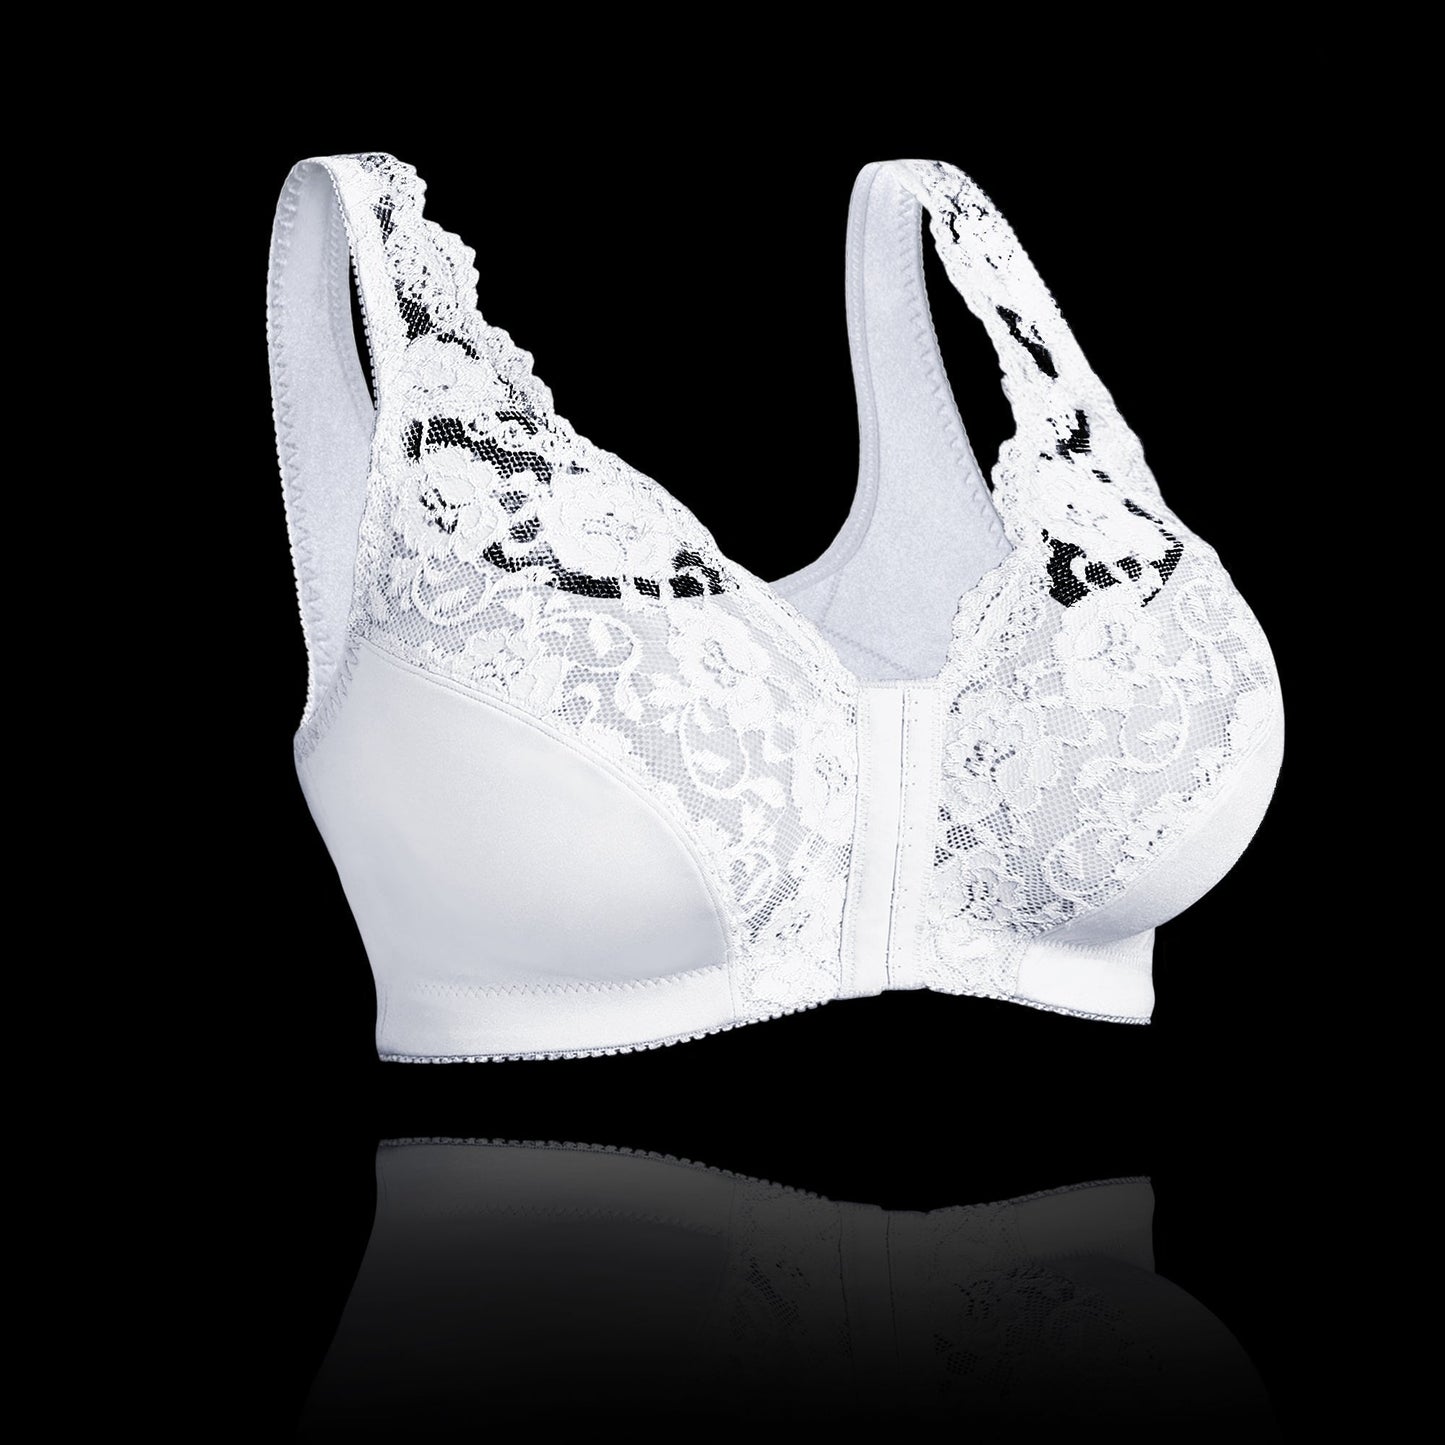 SeniorBra® Front Hooks, Stretch-Lace, Super-Lift And Posture Correction-All In One Bra-(White/Blue.White)